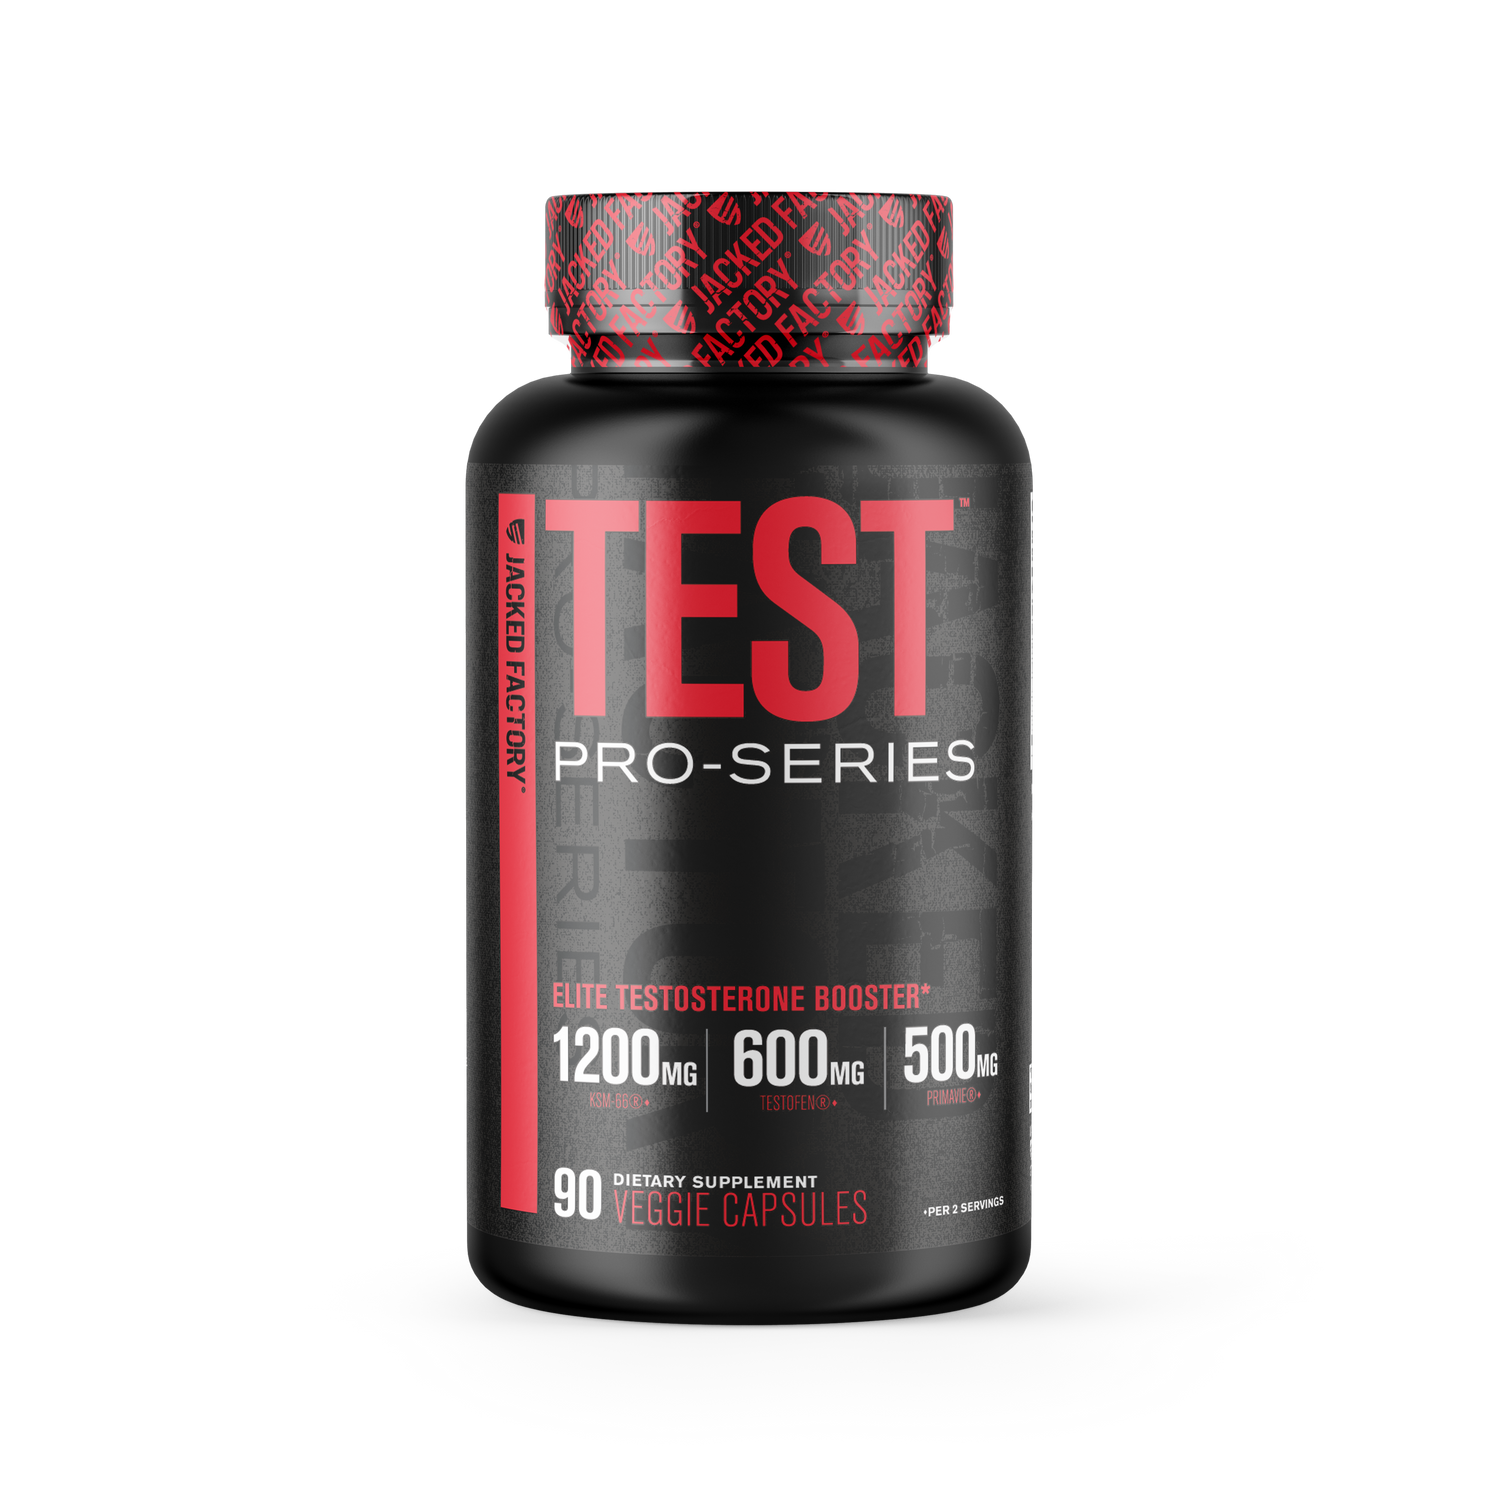 Jacked Factory's Pro-Series Test (90 veggie capsules) in a black bottle with black and red label